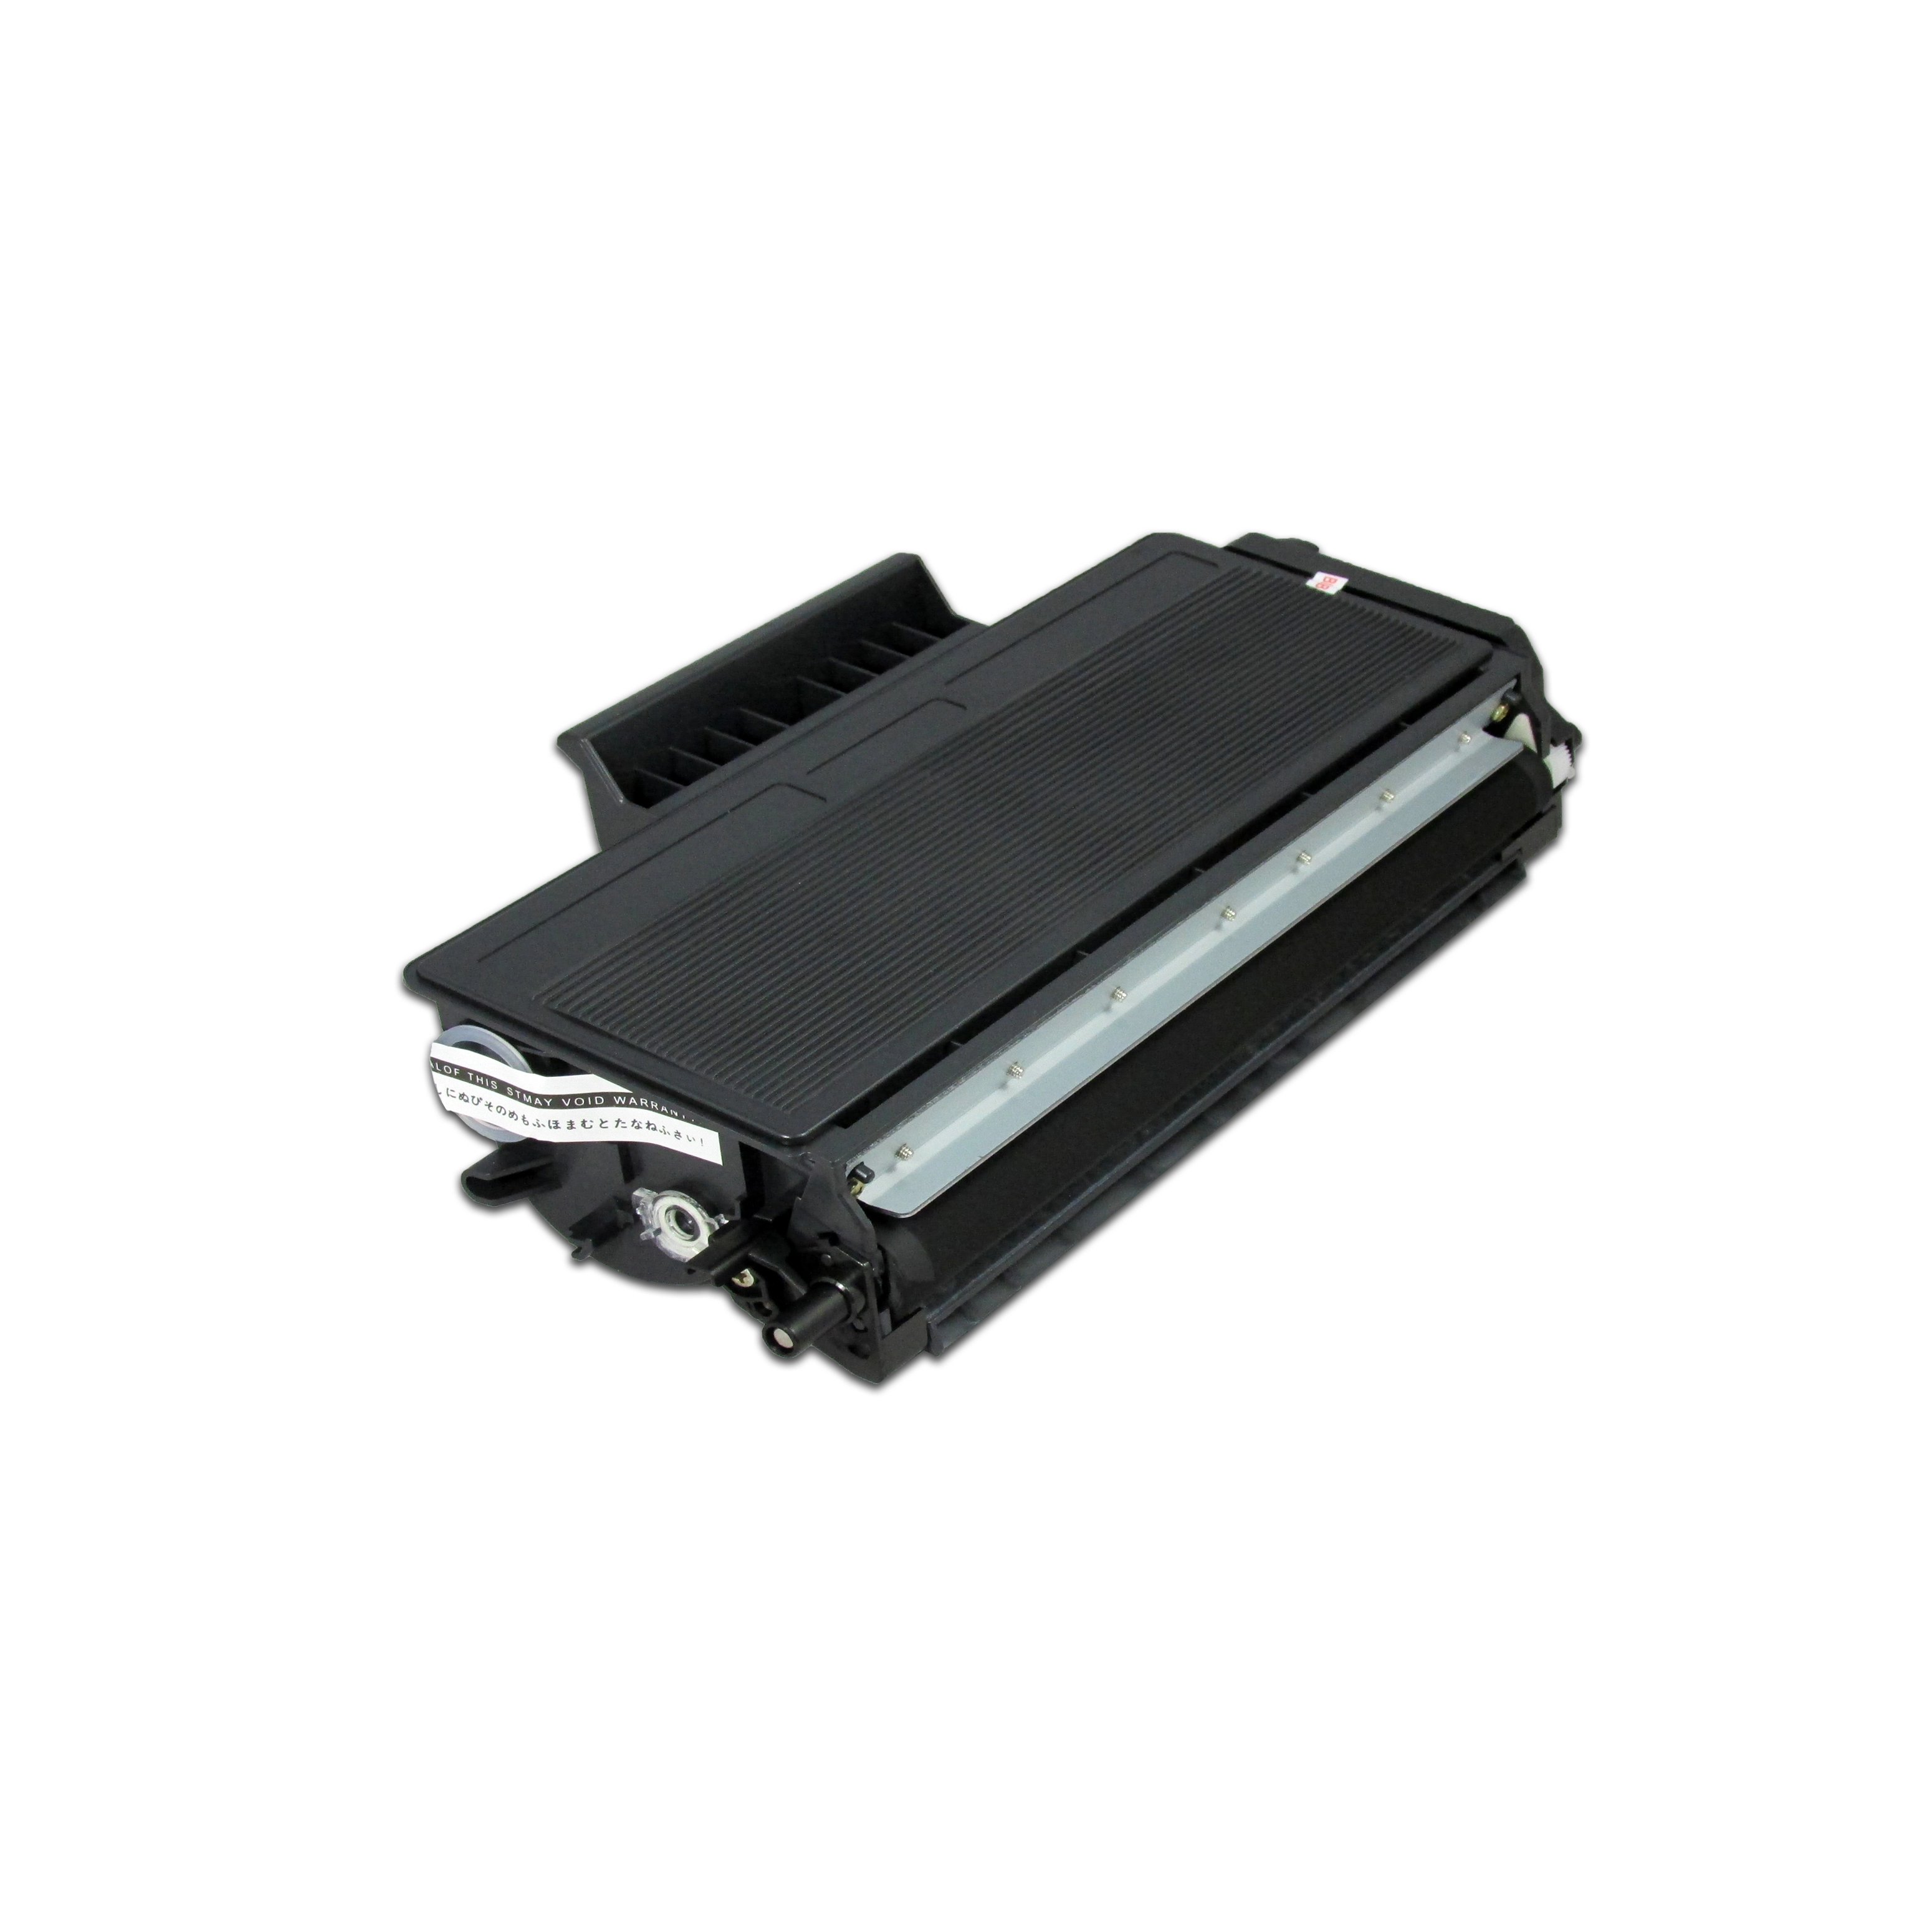 TN3135 toner cartridge Use For Brother HL-5240/5250/5270/5280/5340D.etc